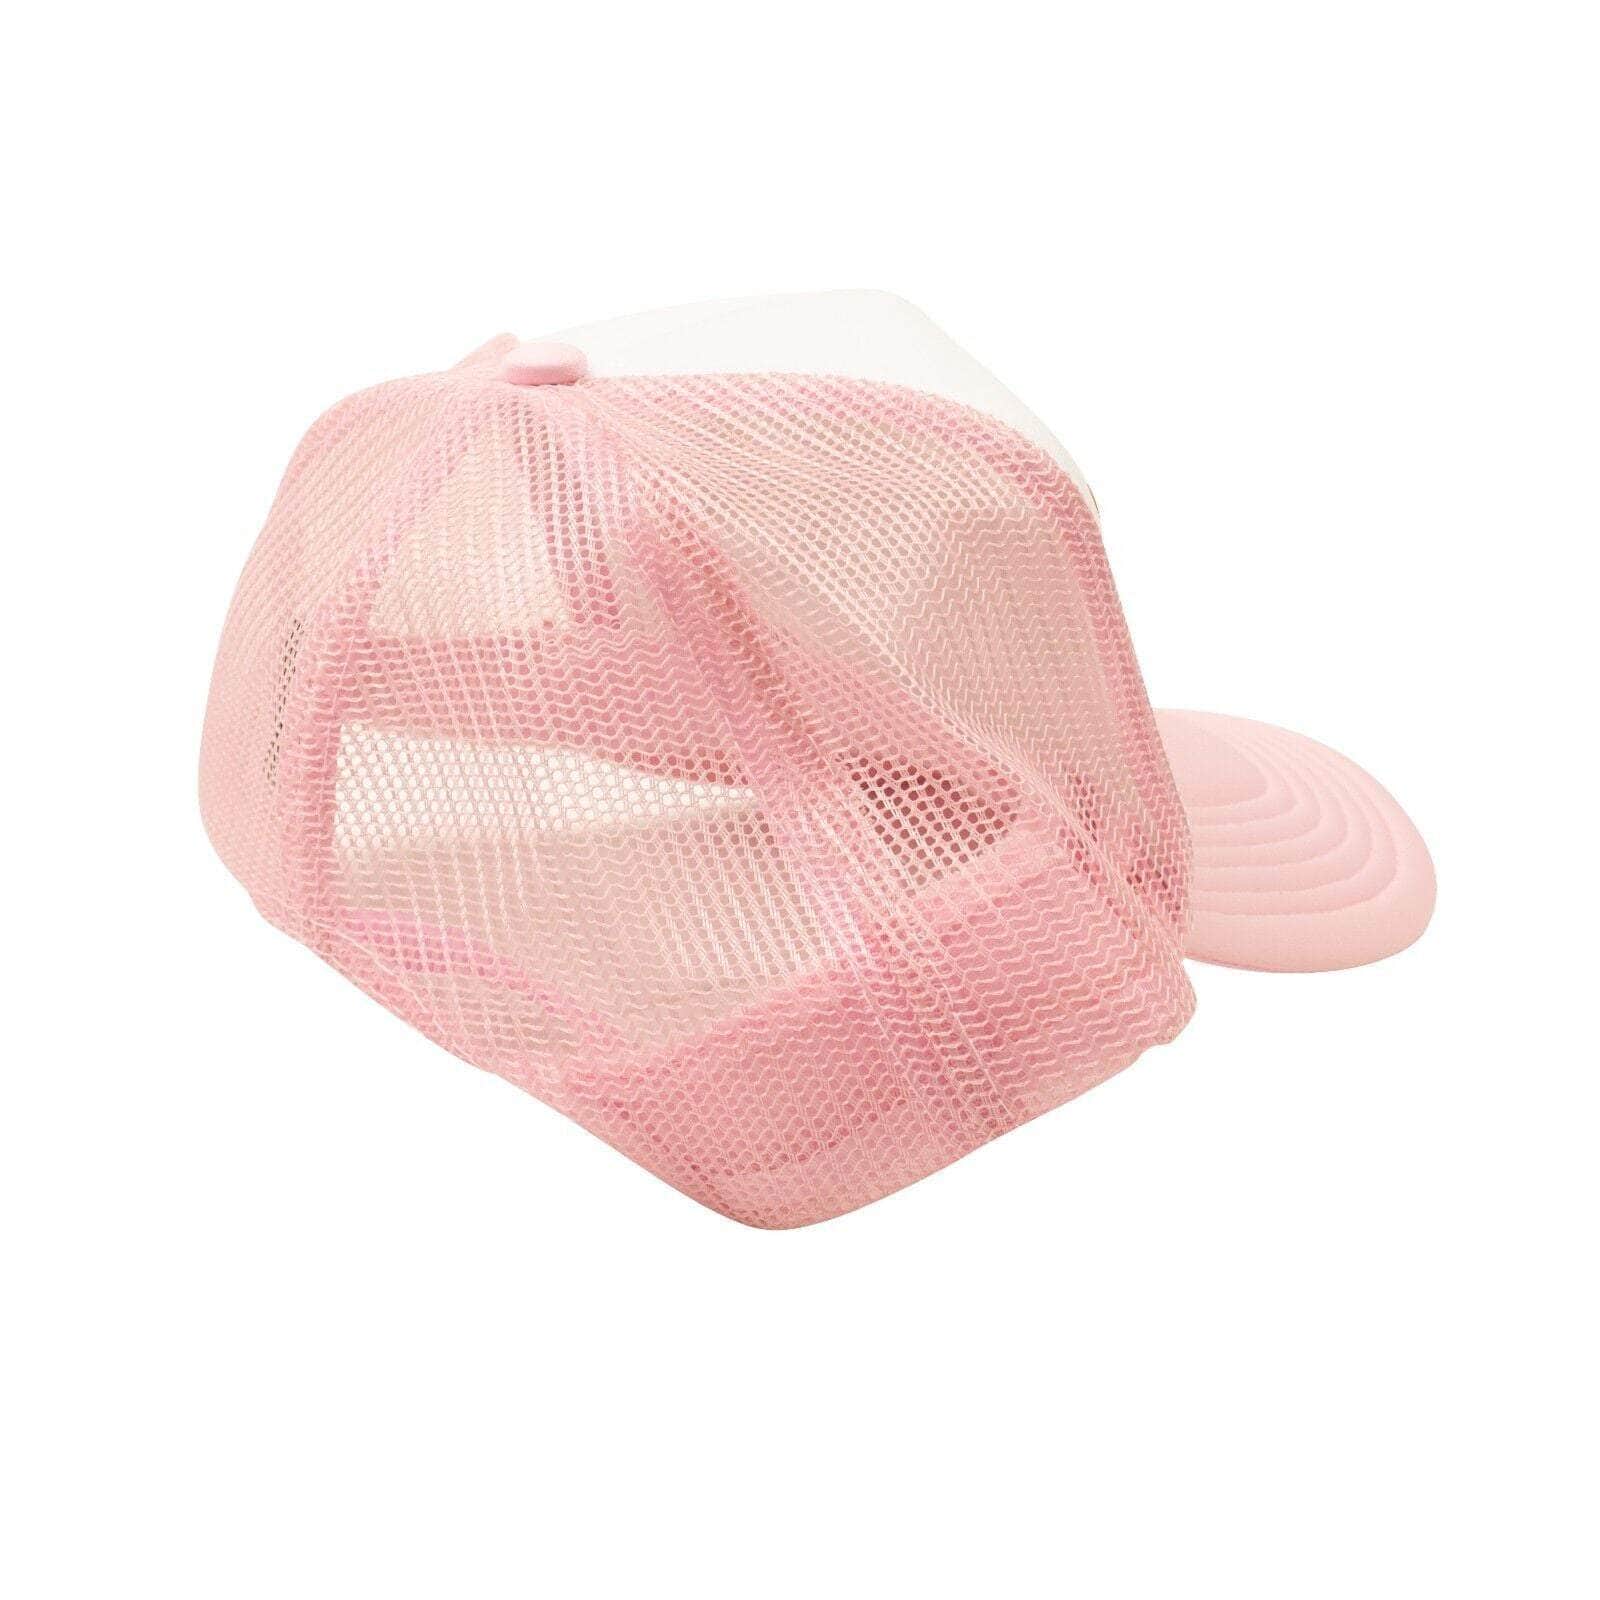 Sicko channelenable-all, chicmi, couponcollection, gender-mens, main-accessories, mens-shoes, sicko, size-os, under-250 OS Light Pink And White Working Like a Sicko Trucker Hat SCK-XACC-0011/OS SCK-XACC-0011/OS